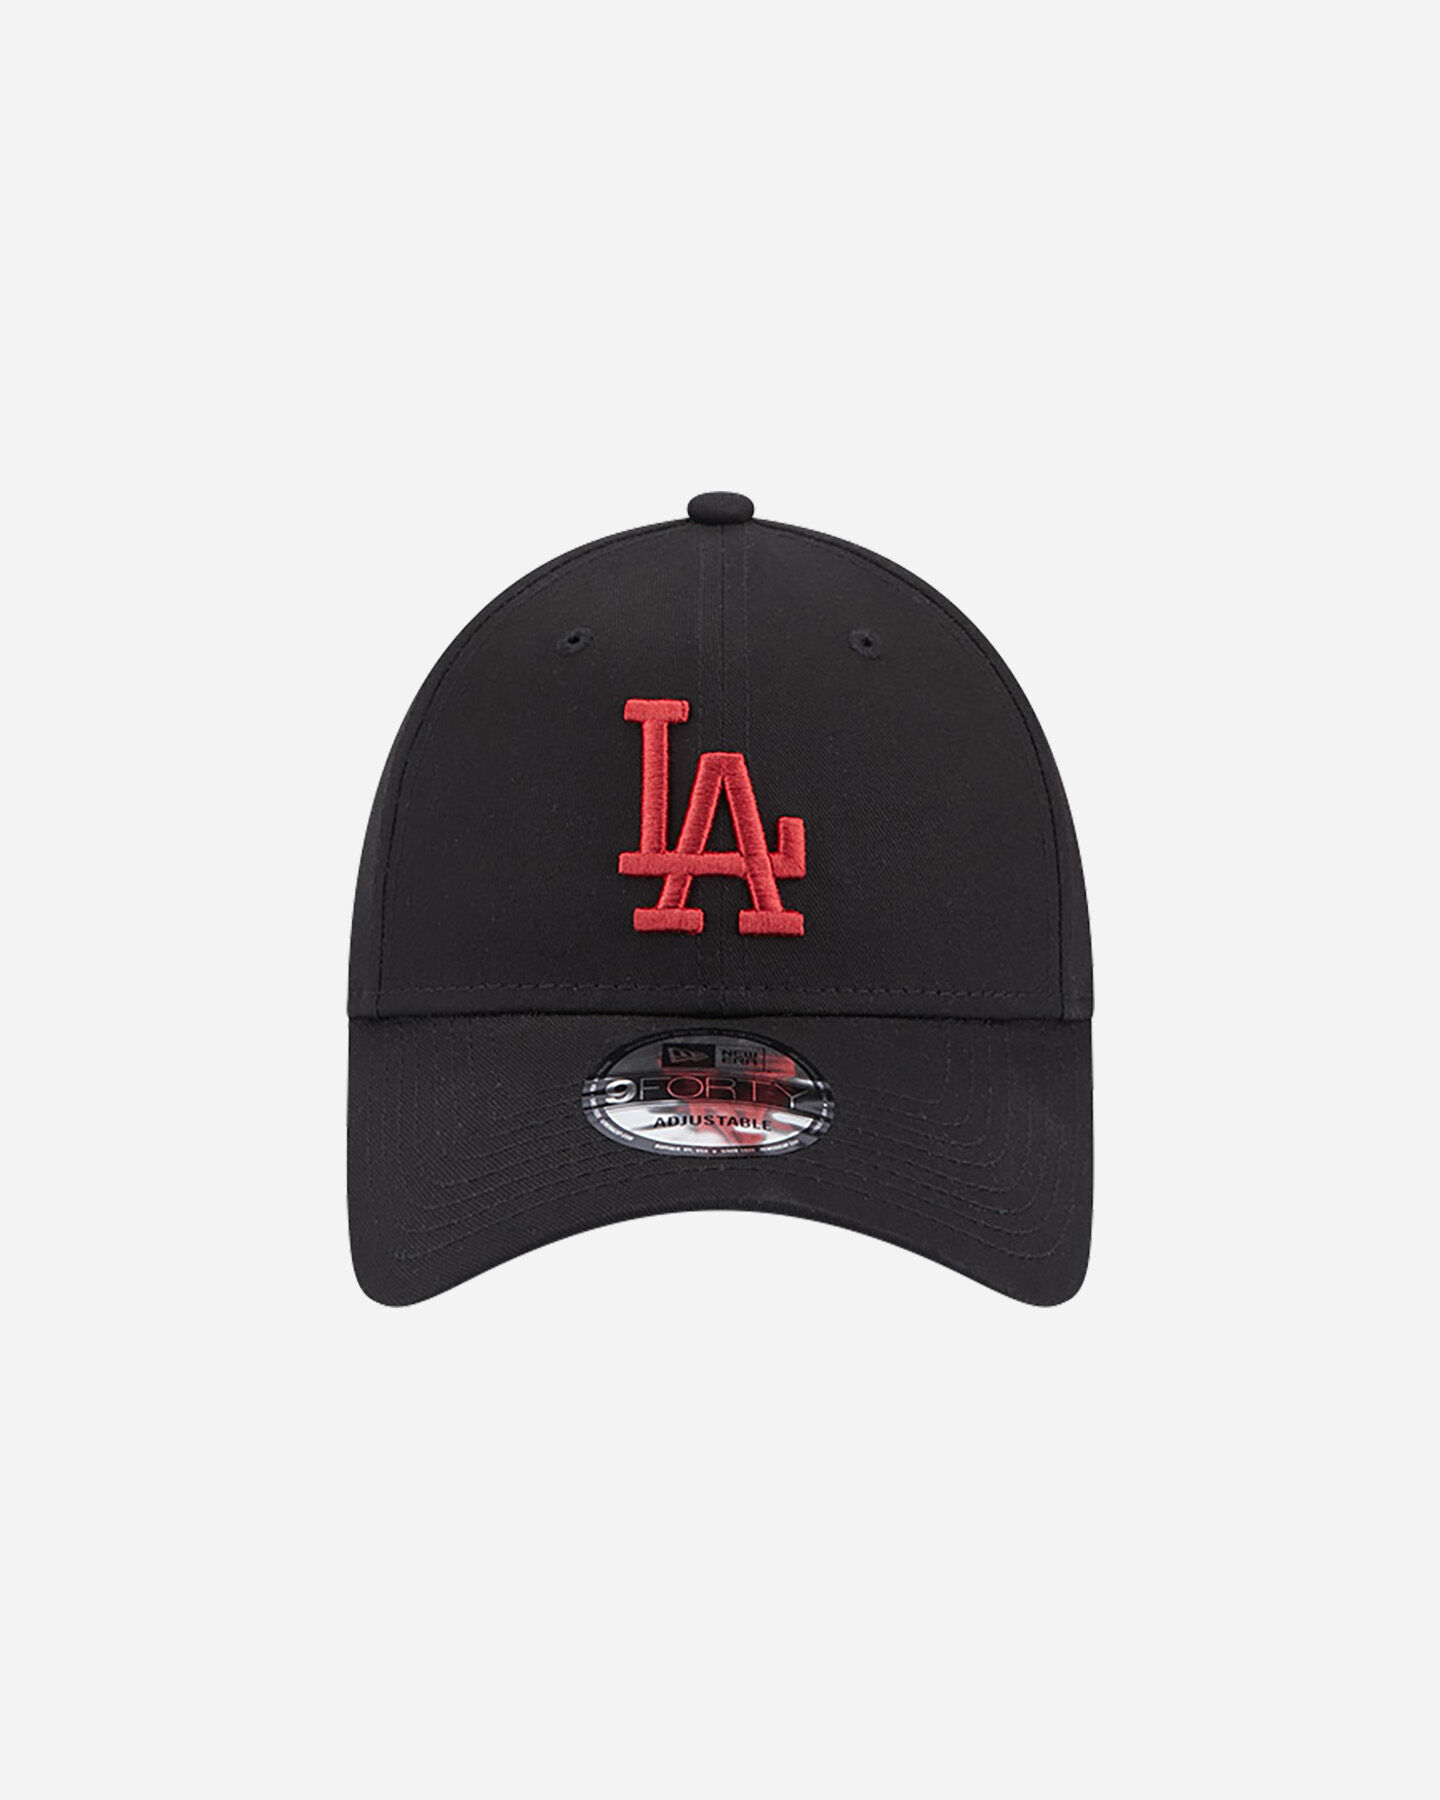  Cappellino NEW ERA 9FORTY MLB LEAGUE LOS ANGELES DODGERS  S5606276|001|OSFM scatto 1